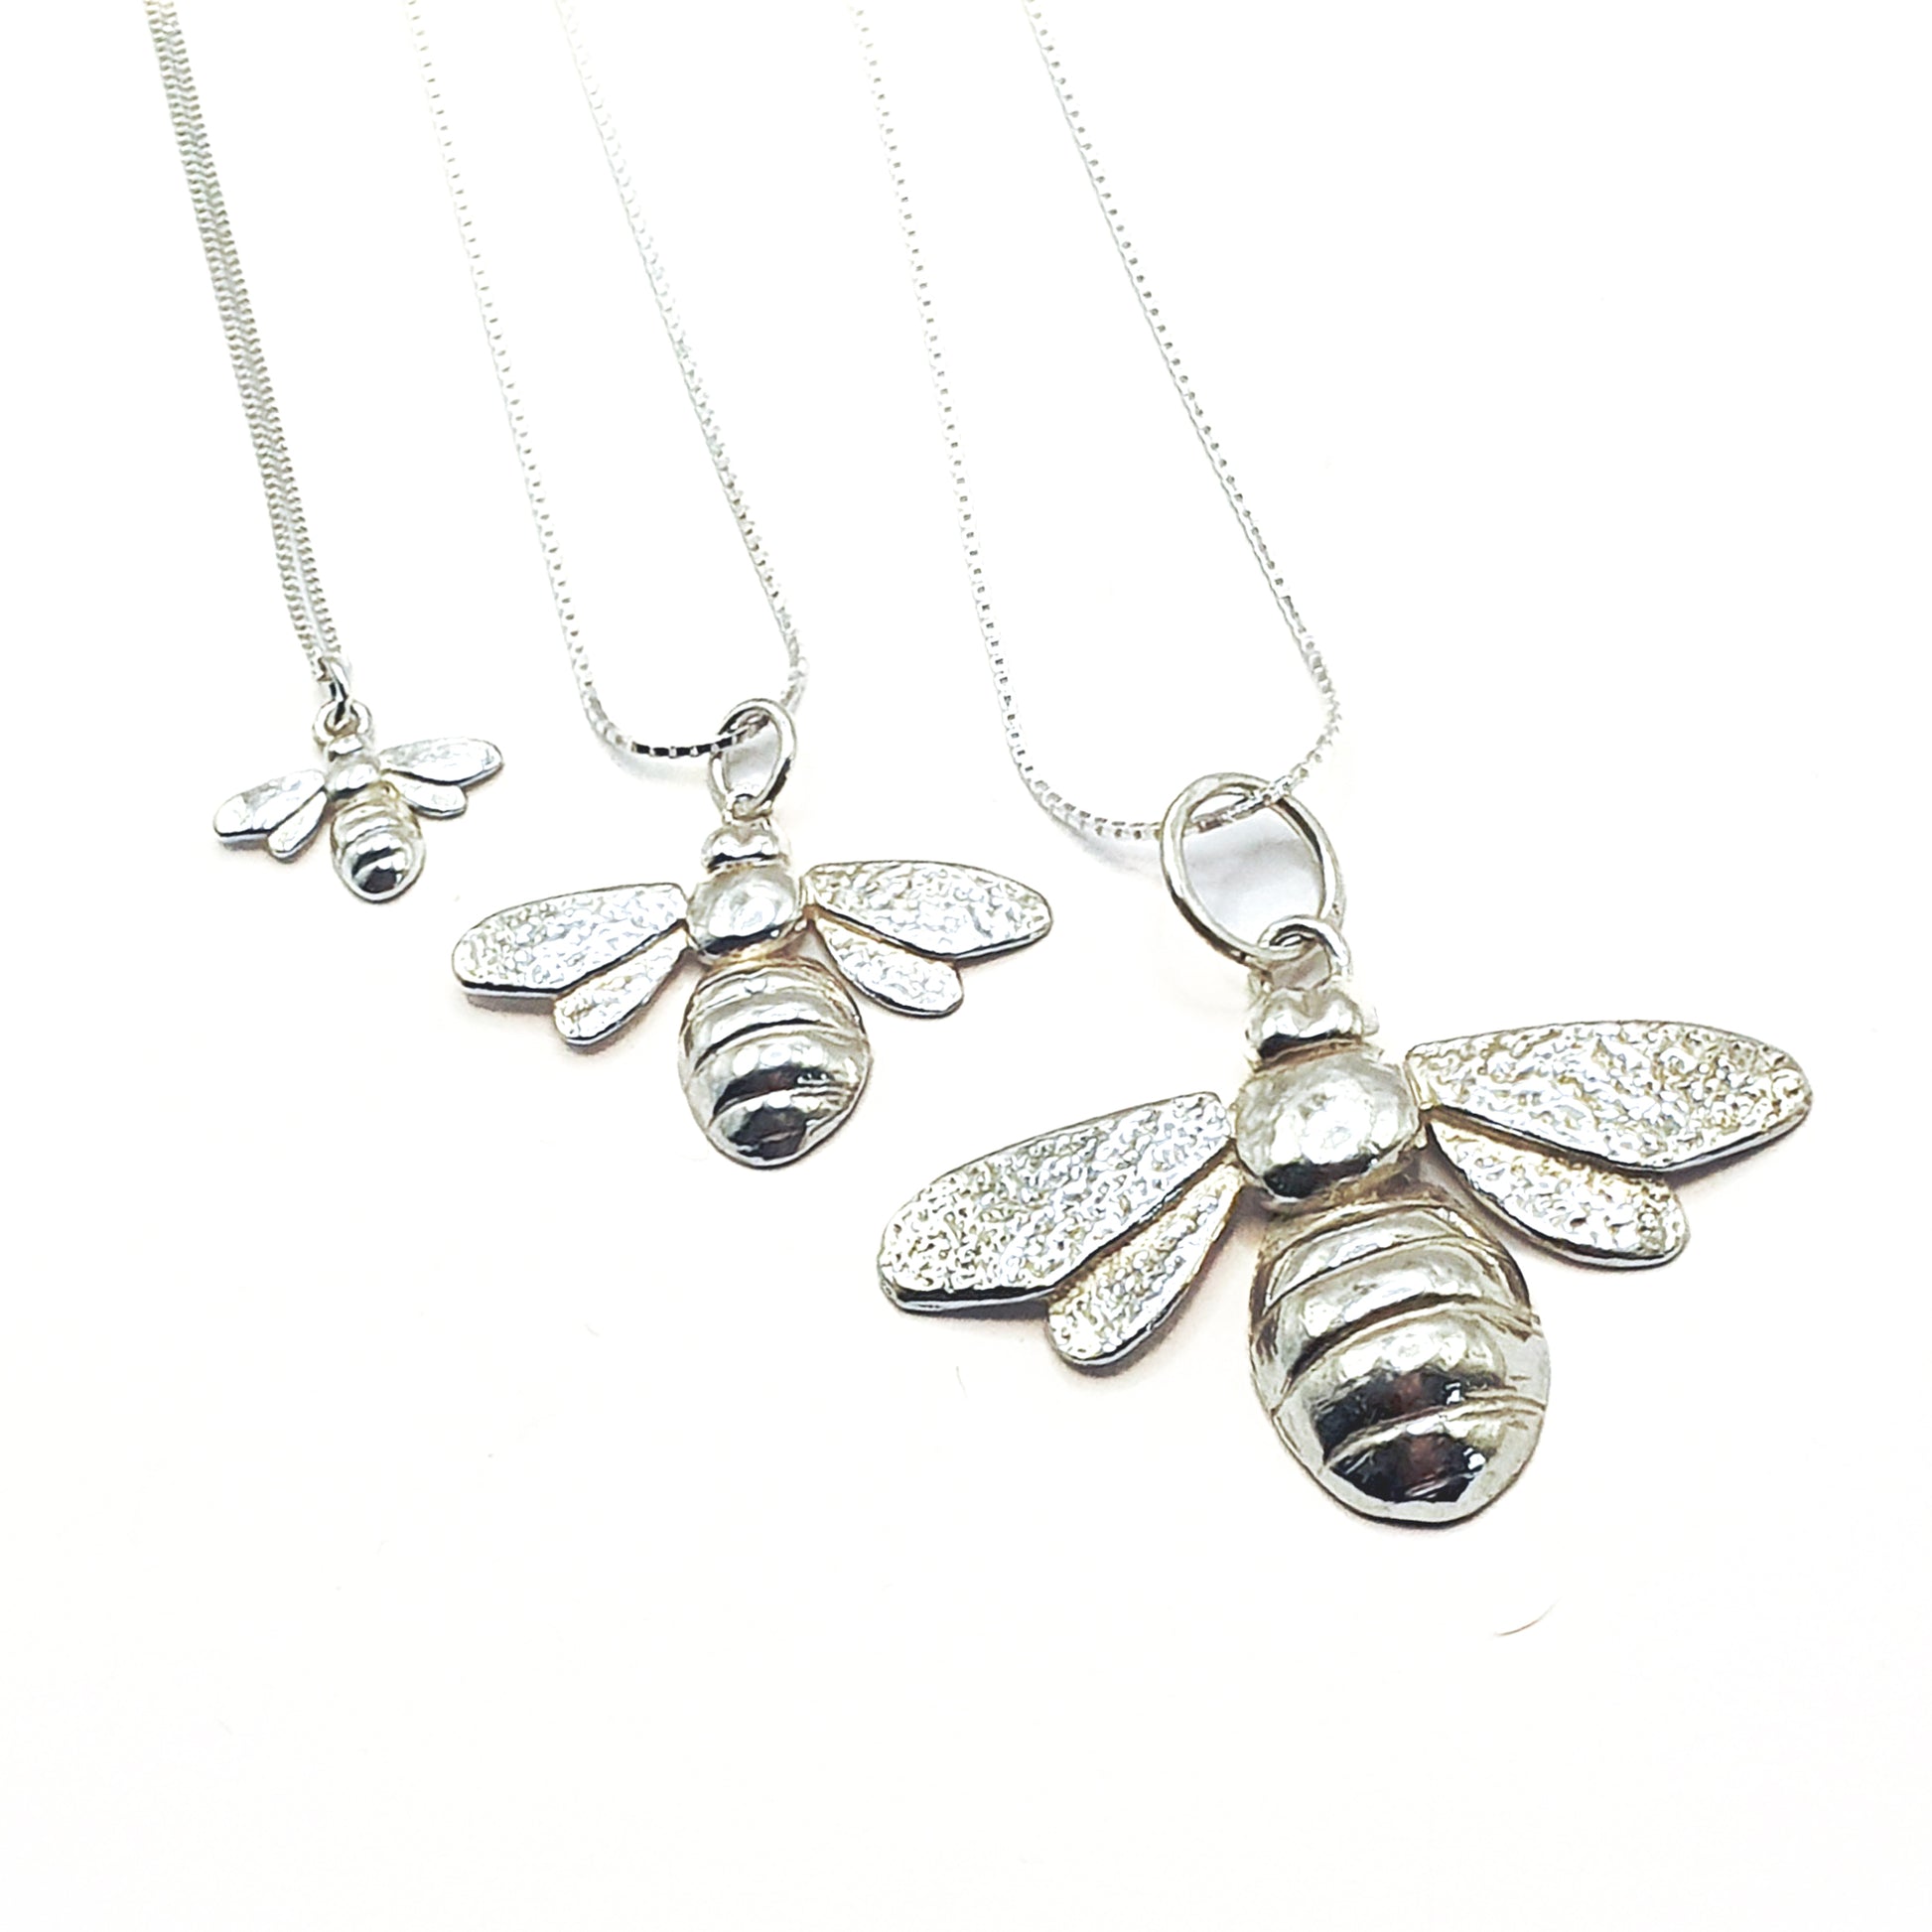 Sterling silver bee pendants in three sizes